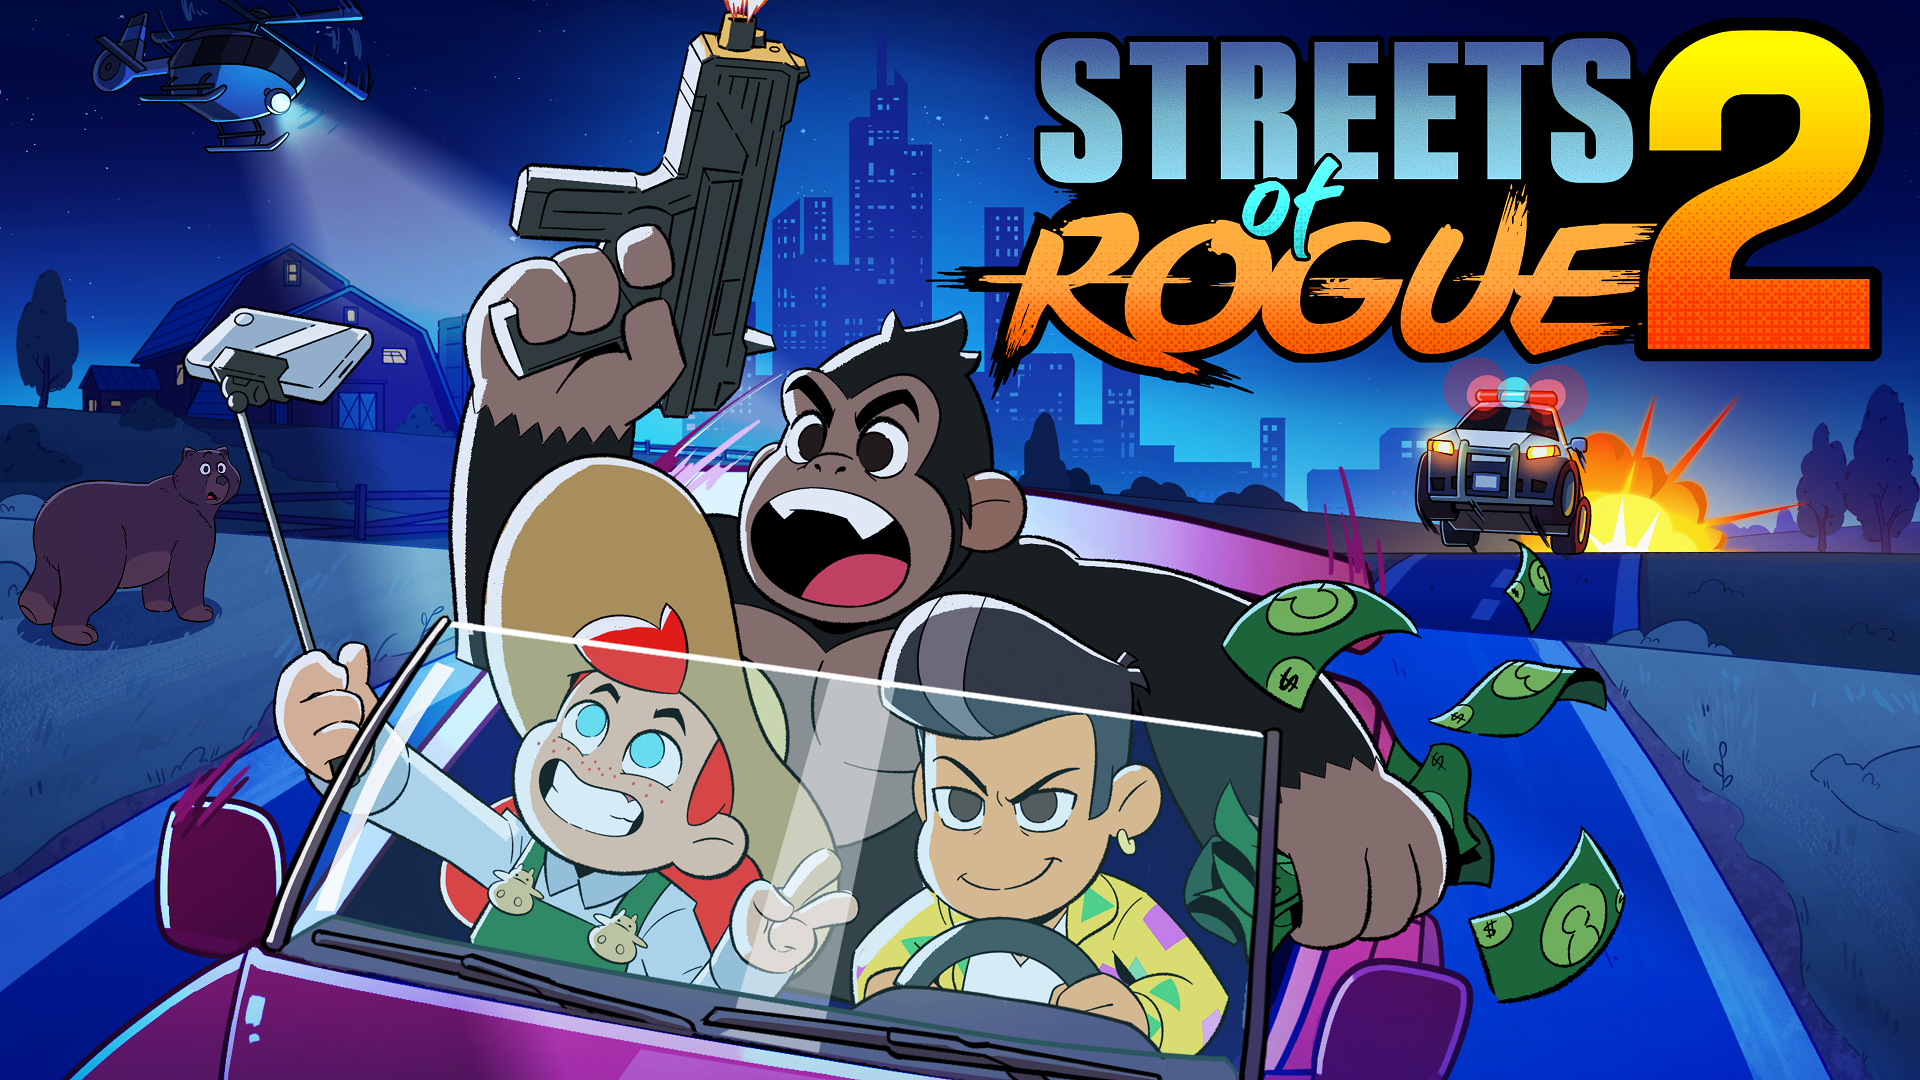 Streets of Rogue 2 Streets of Rogue